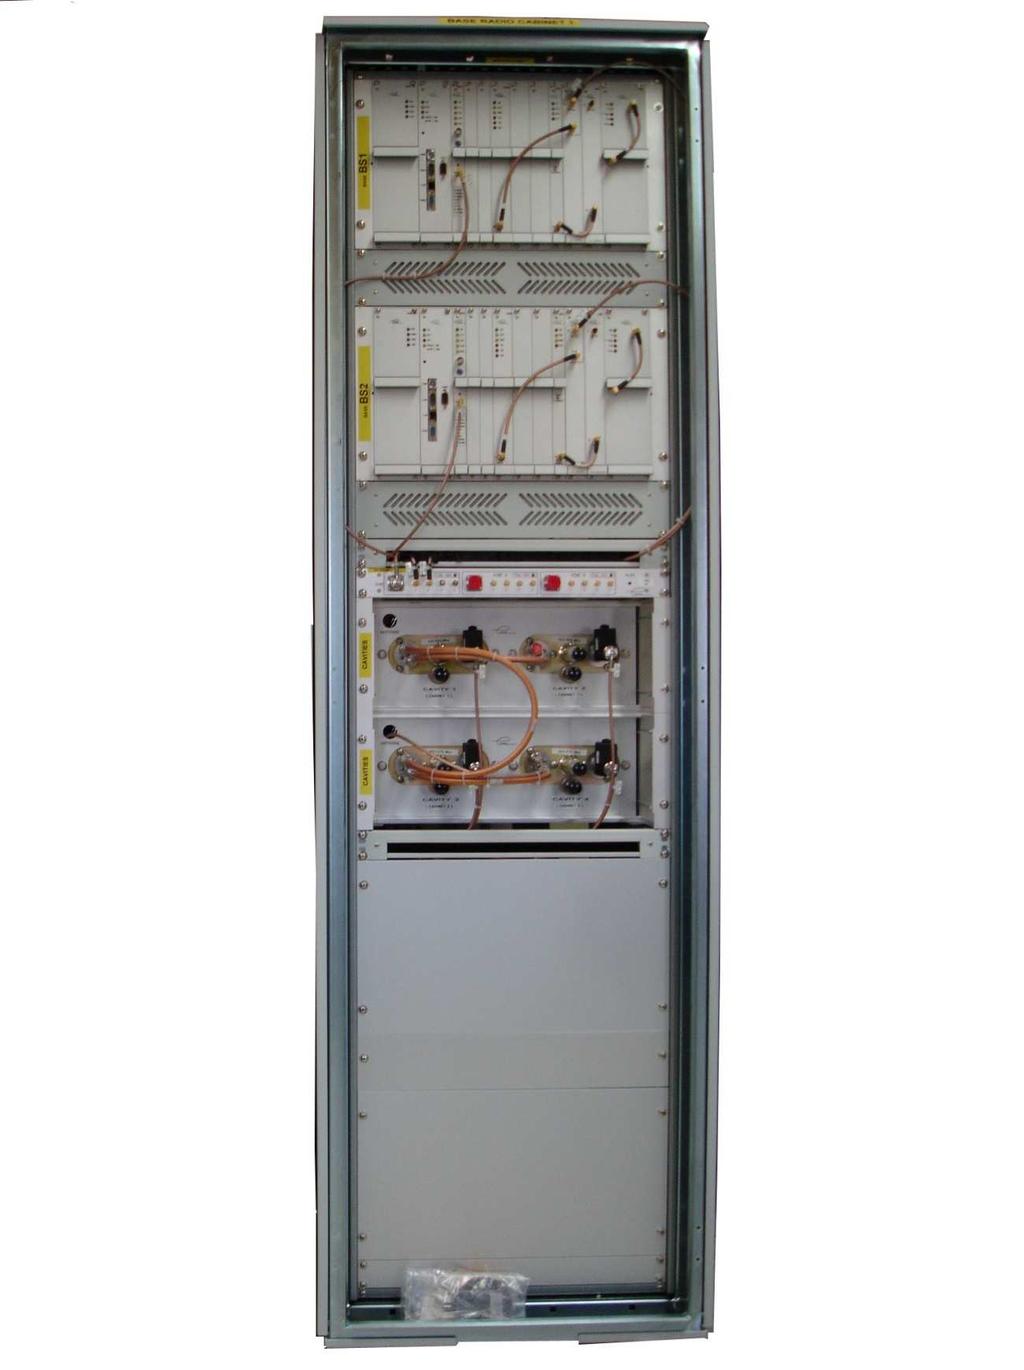 Figure 7-2 : 2 Tetra carriers cabinets with Backup